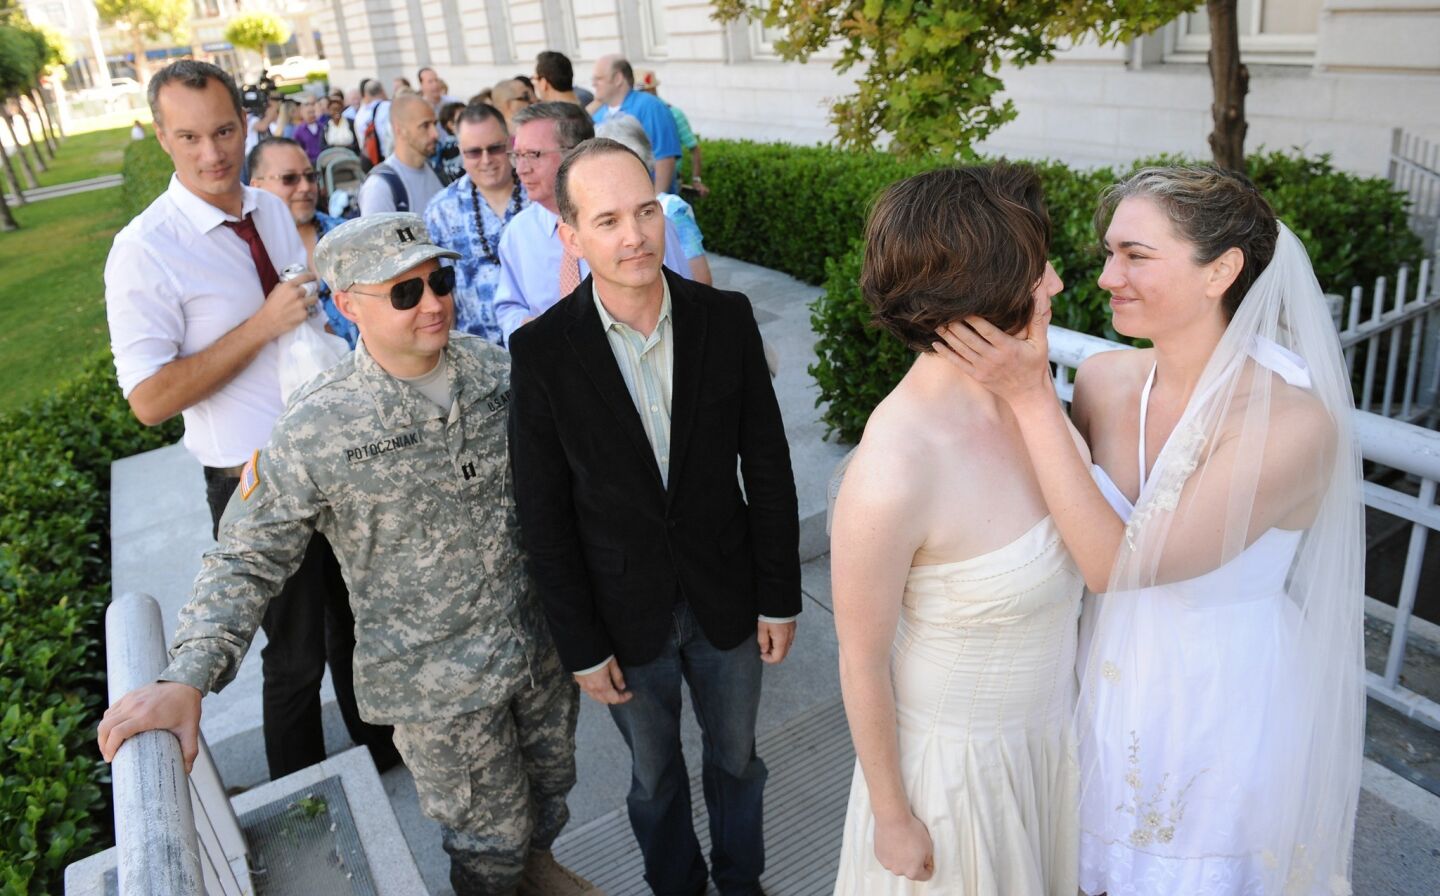 Elizabeth Carey, left, and Cyntia Wides embrace as Army Sgt. Michael Potoczniak and his partner Todd Saunders wait patiently in line to get married at City Hall in San Francisco on Saturday.